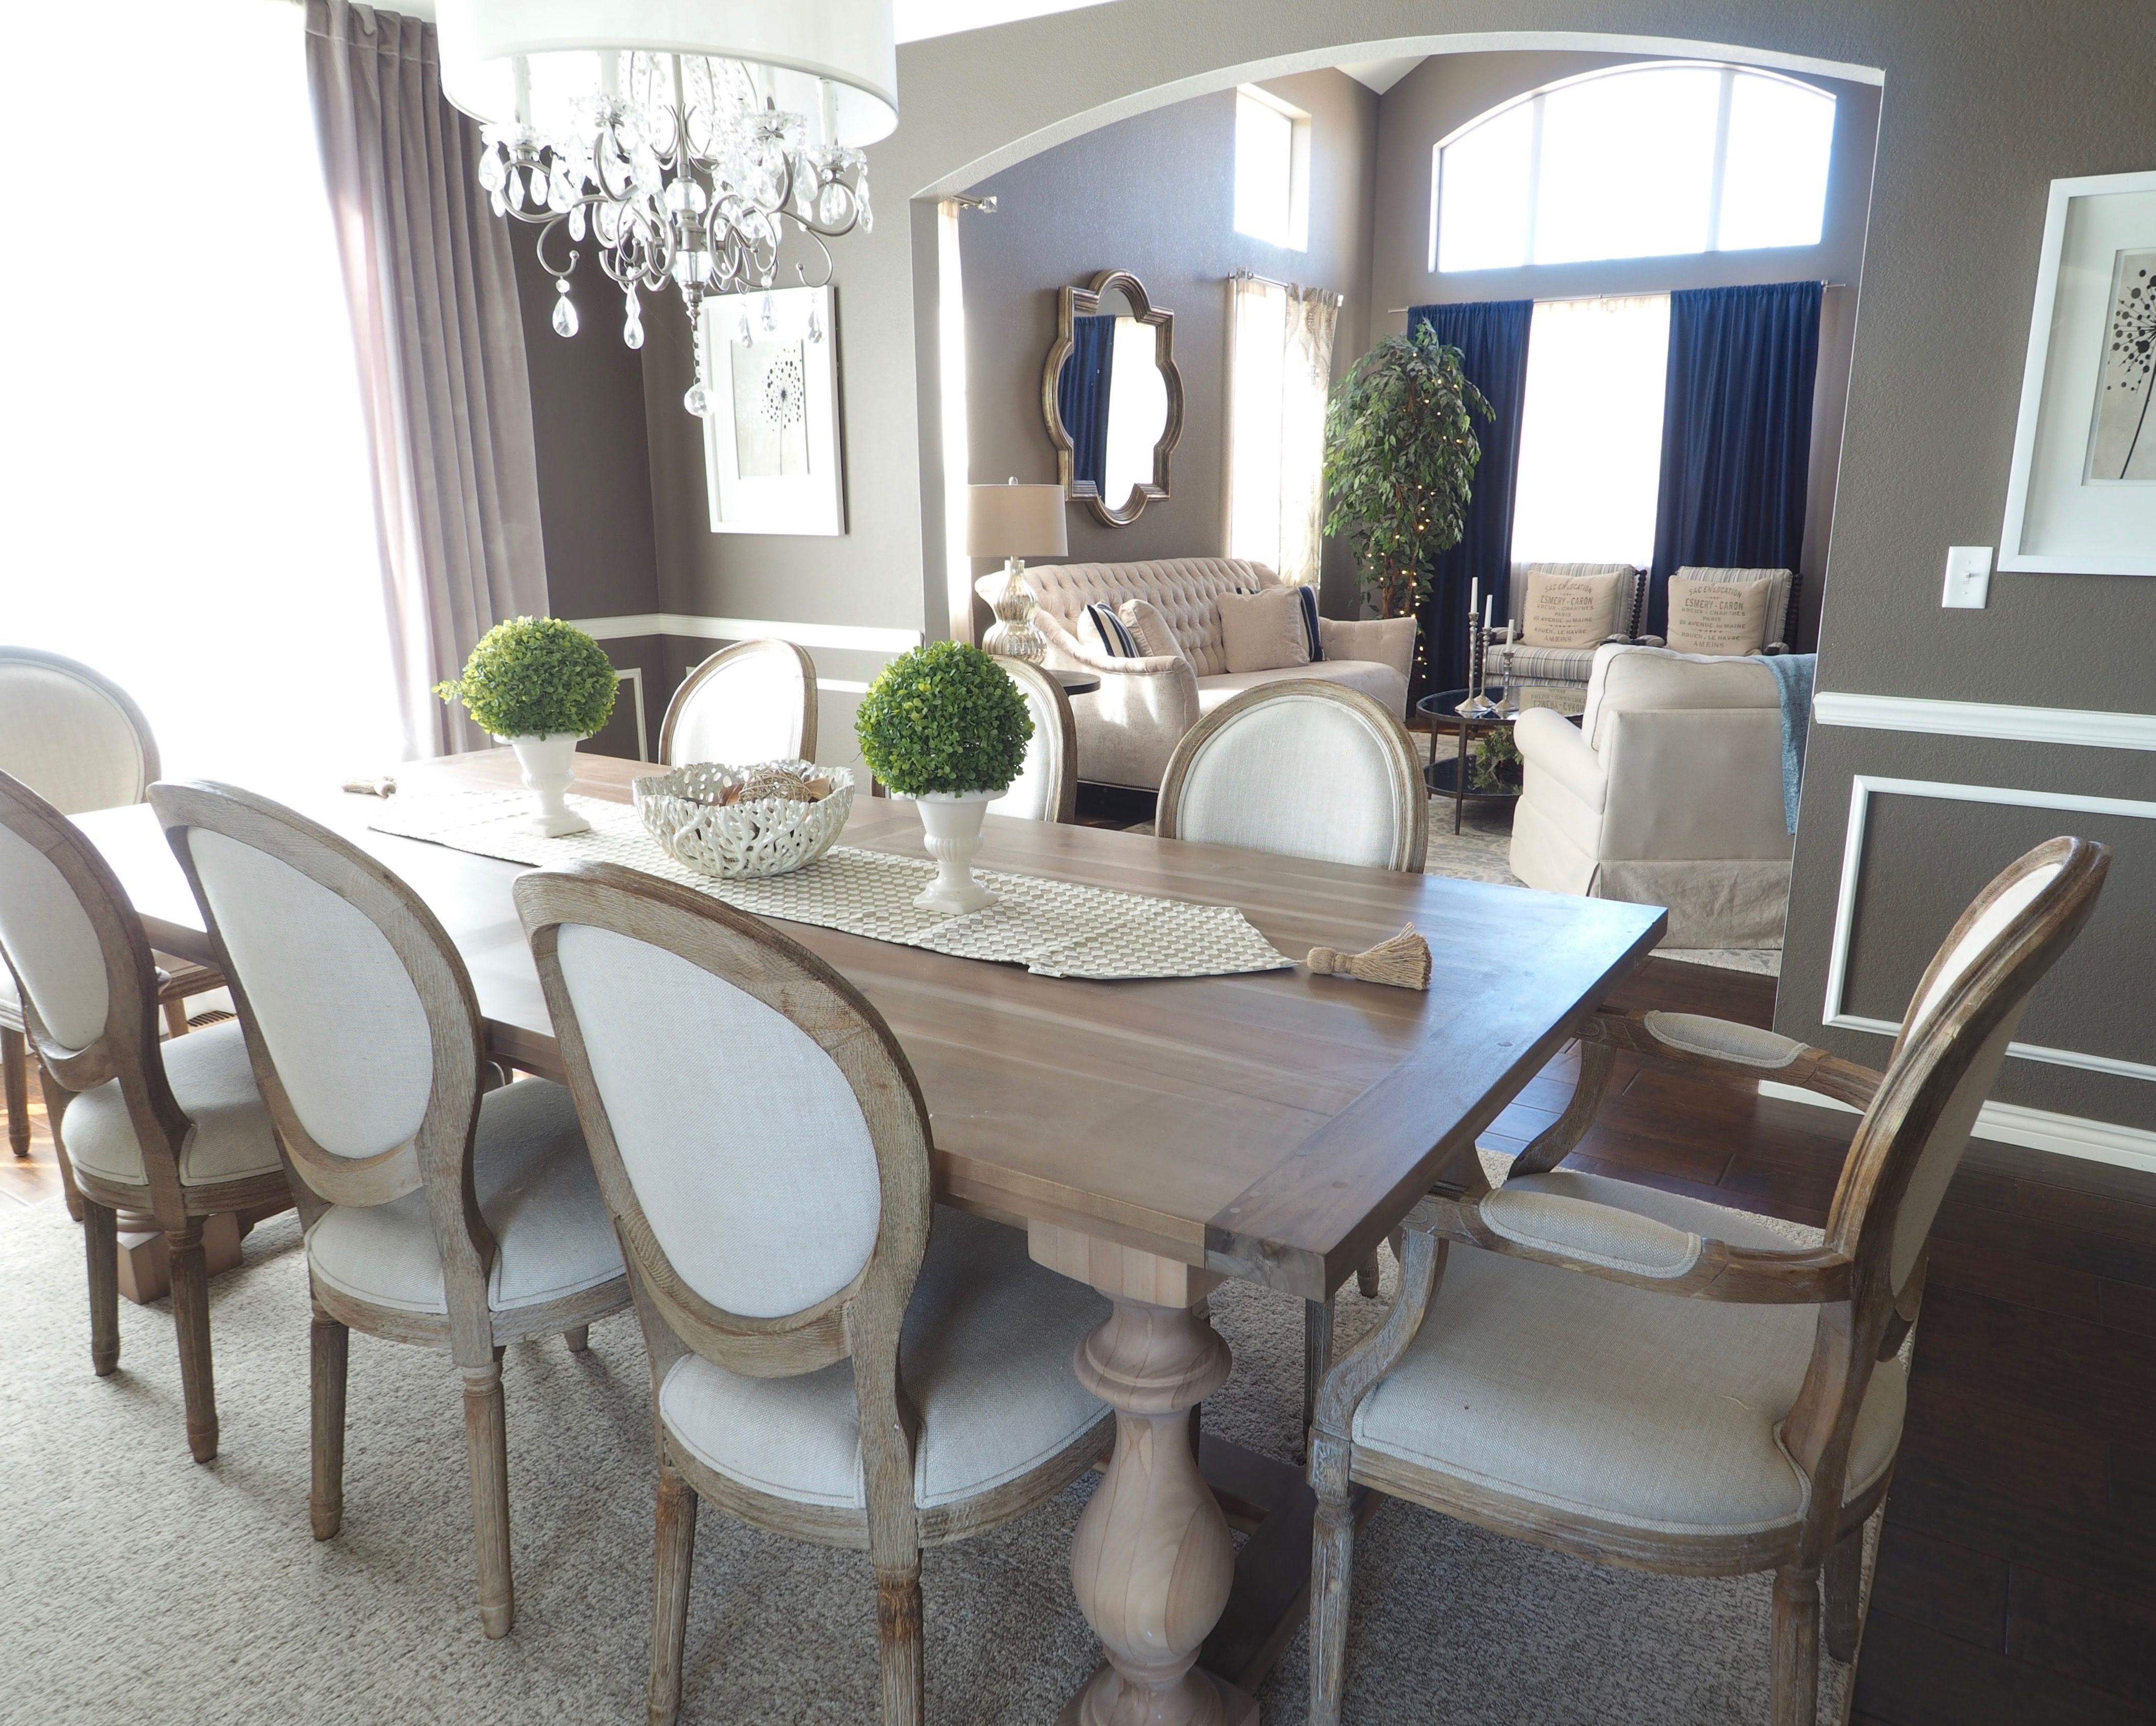 Glam Dining Room Vintage Dining Room – Rustic Dining Room Inside Most Recent Market 7 Piece Dining Sets With Host And Side Chairs (View 15 of 20)